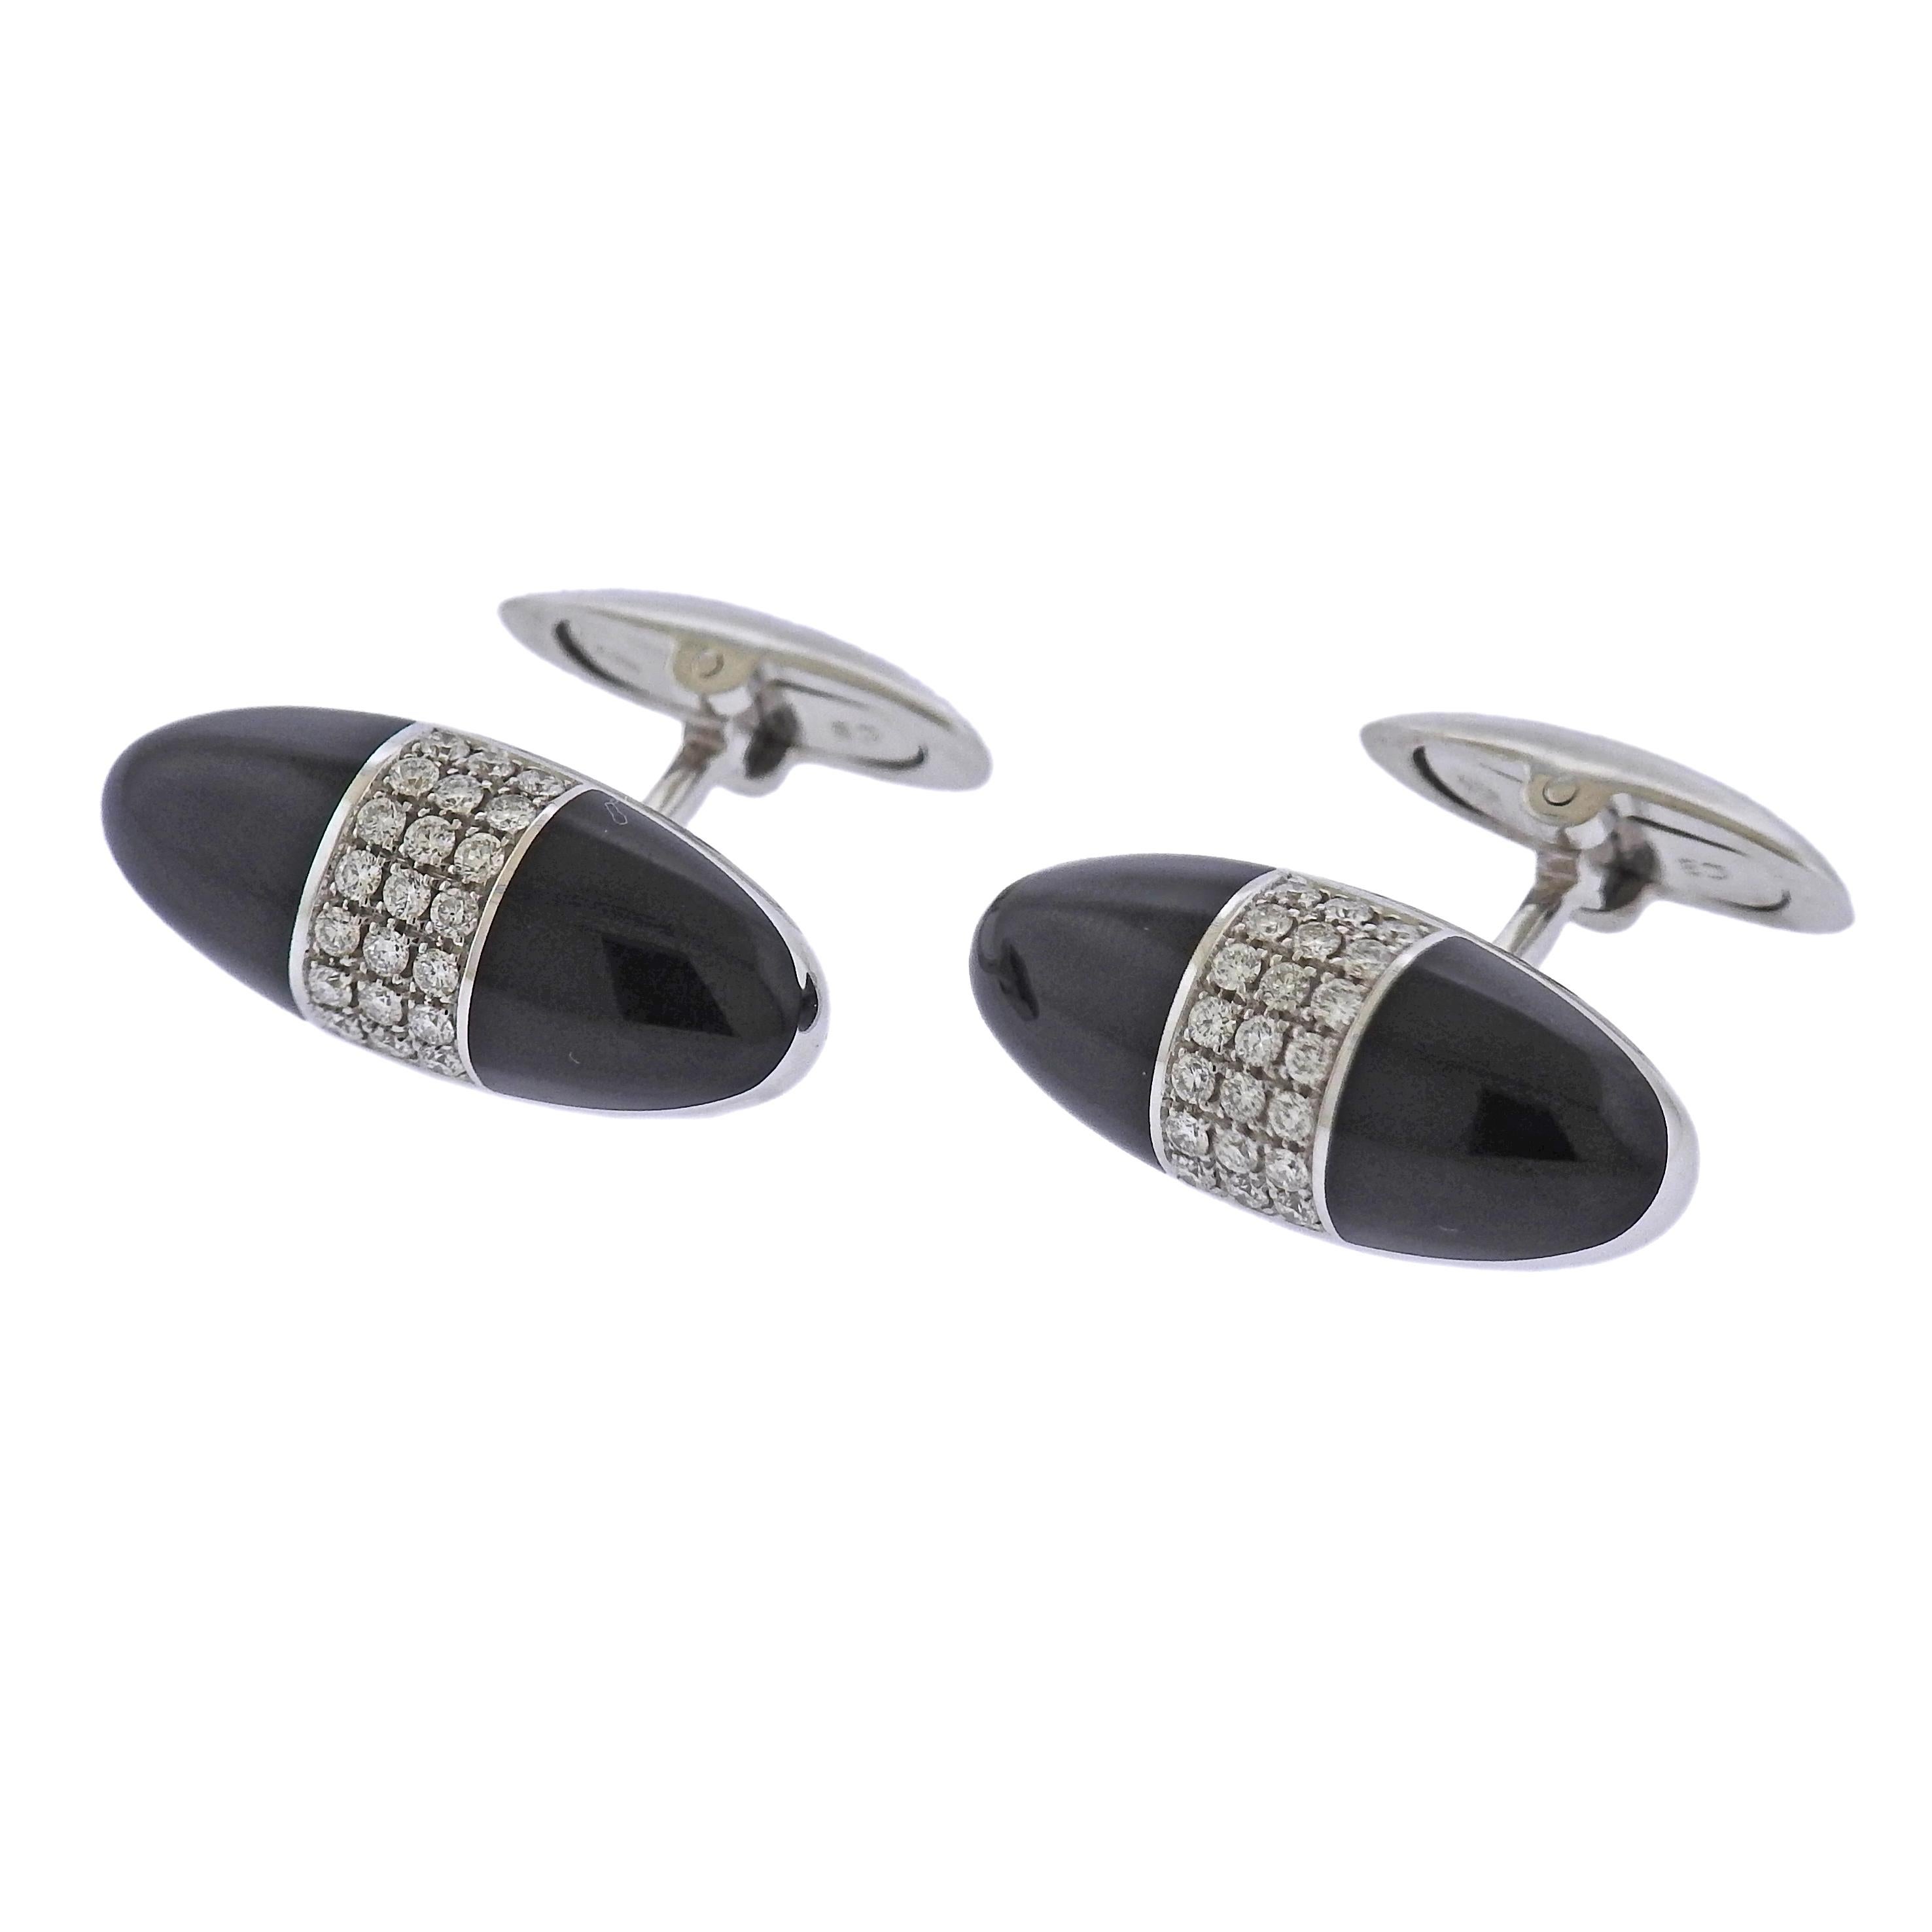 Brand new with tag Bucherer cufflinks, in 18k gold with 0.50ctw SI/H diamonds and onyx. Cufflink top measures 24mm x 10mm. Weight: 13.5 grams. Marked: CB,750. Retail Price $6100. Comes with box.